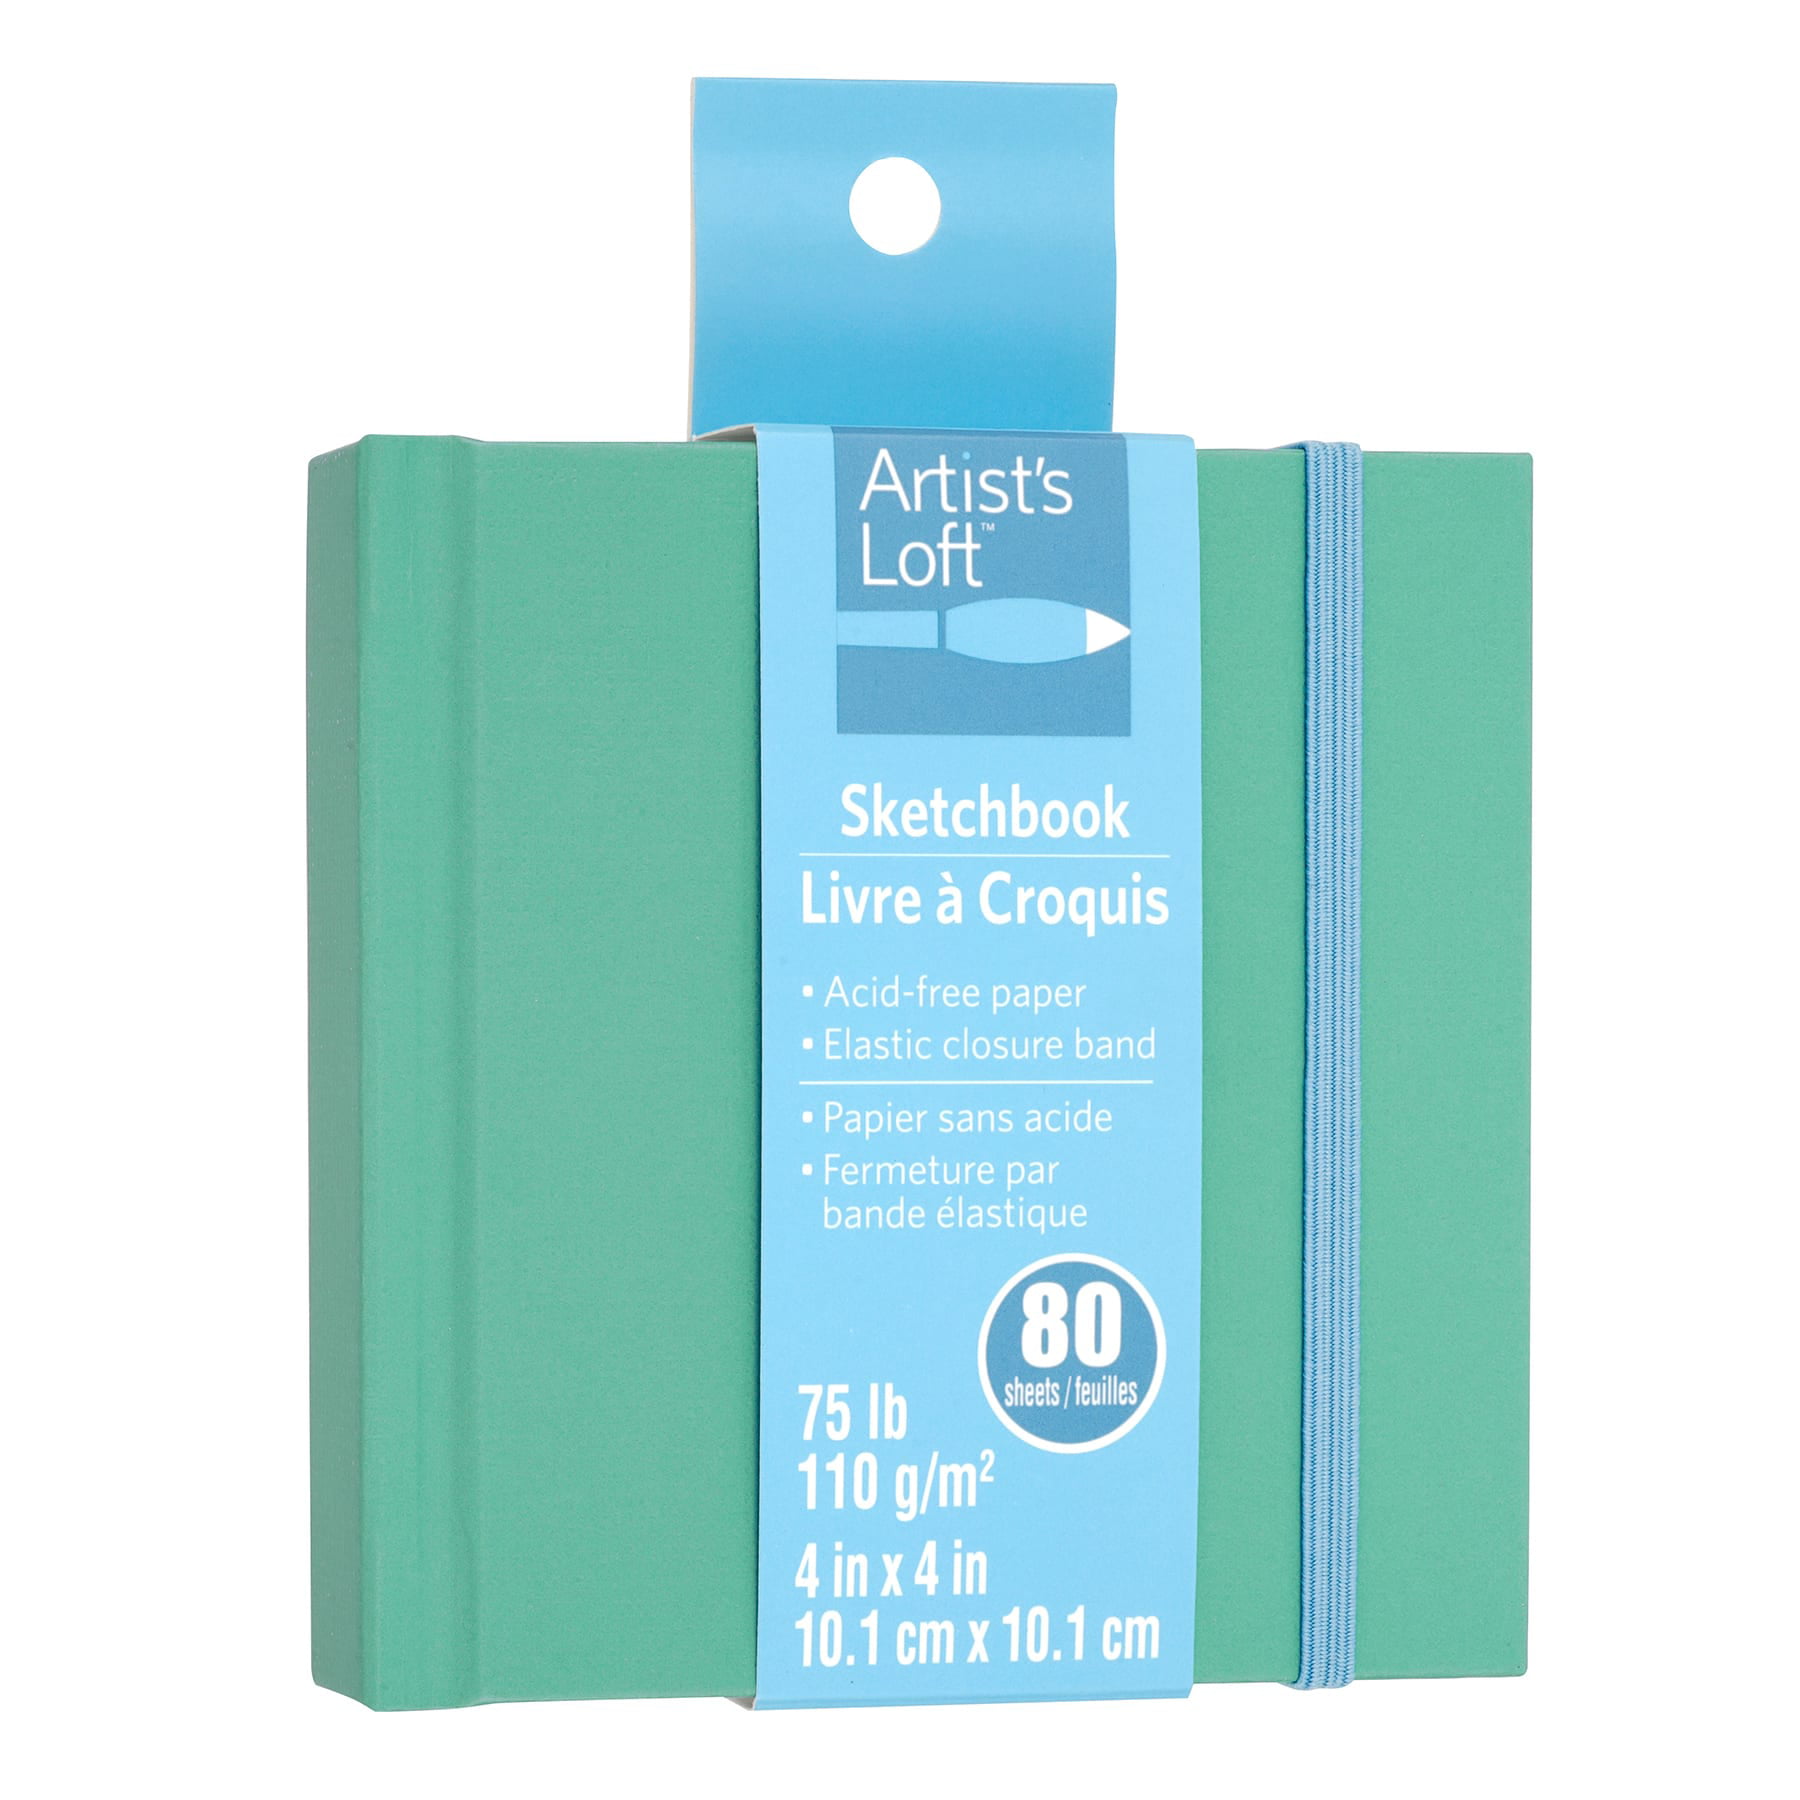 Lot Of 2: Artist’s Loft Sketchbook And The Fine Touch Artist Sketch Pad